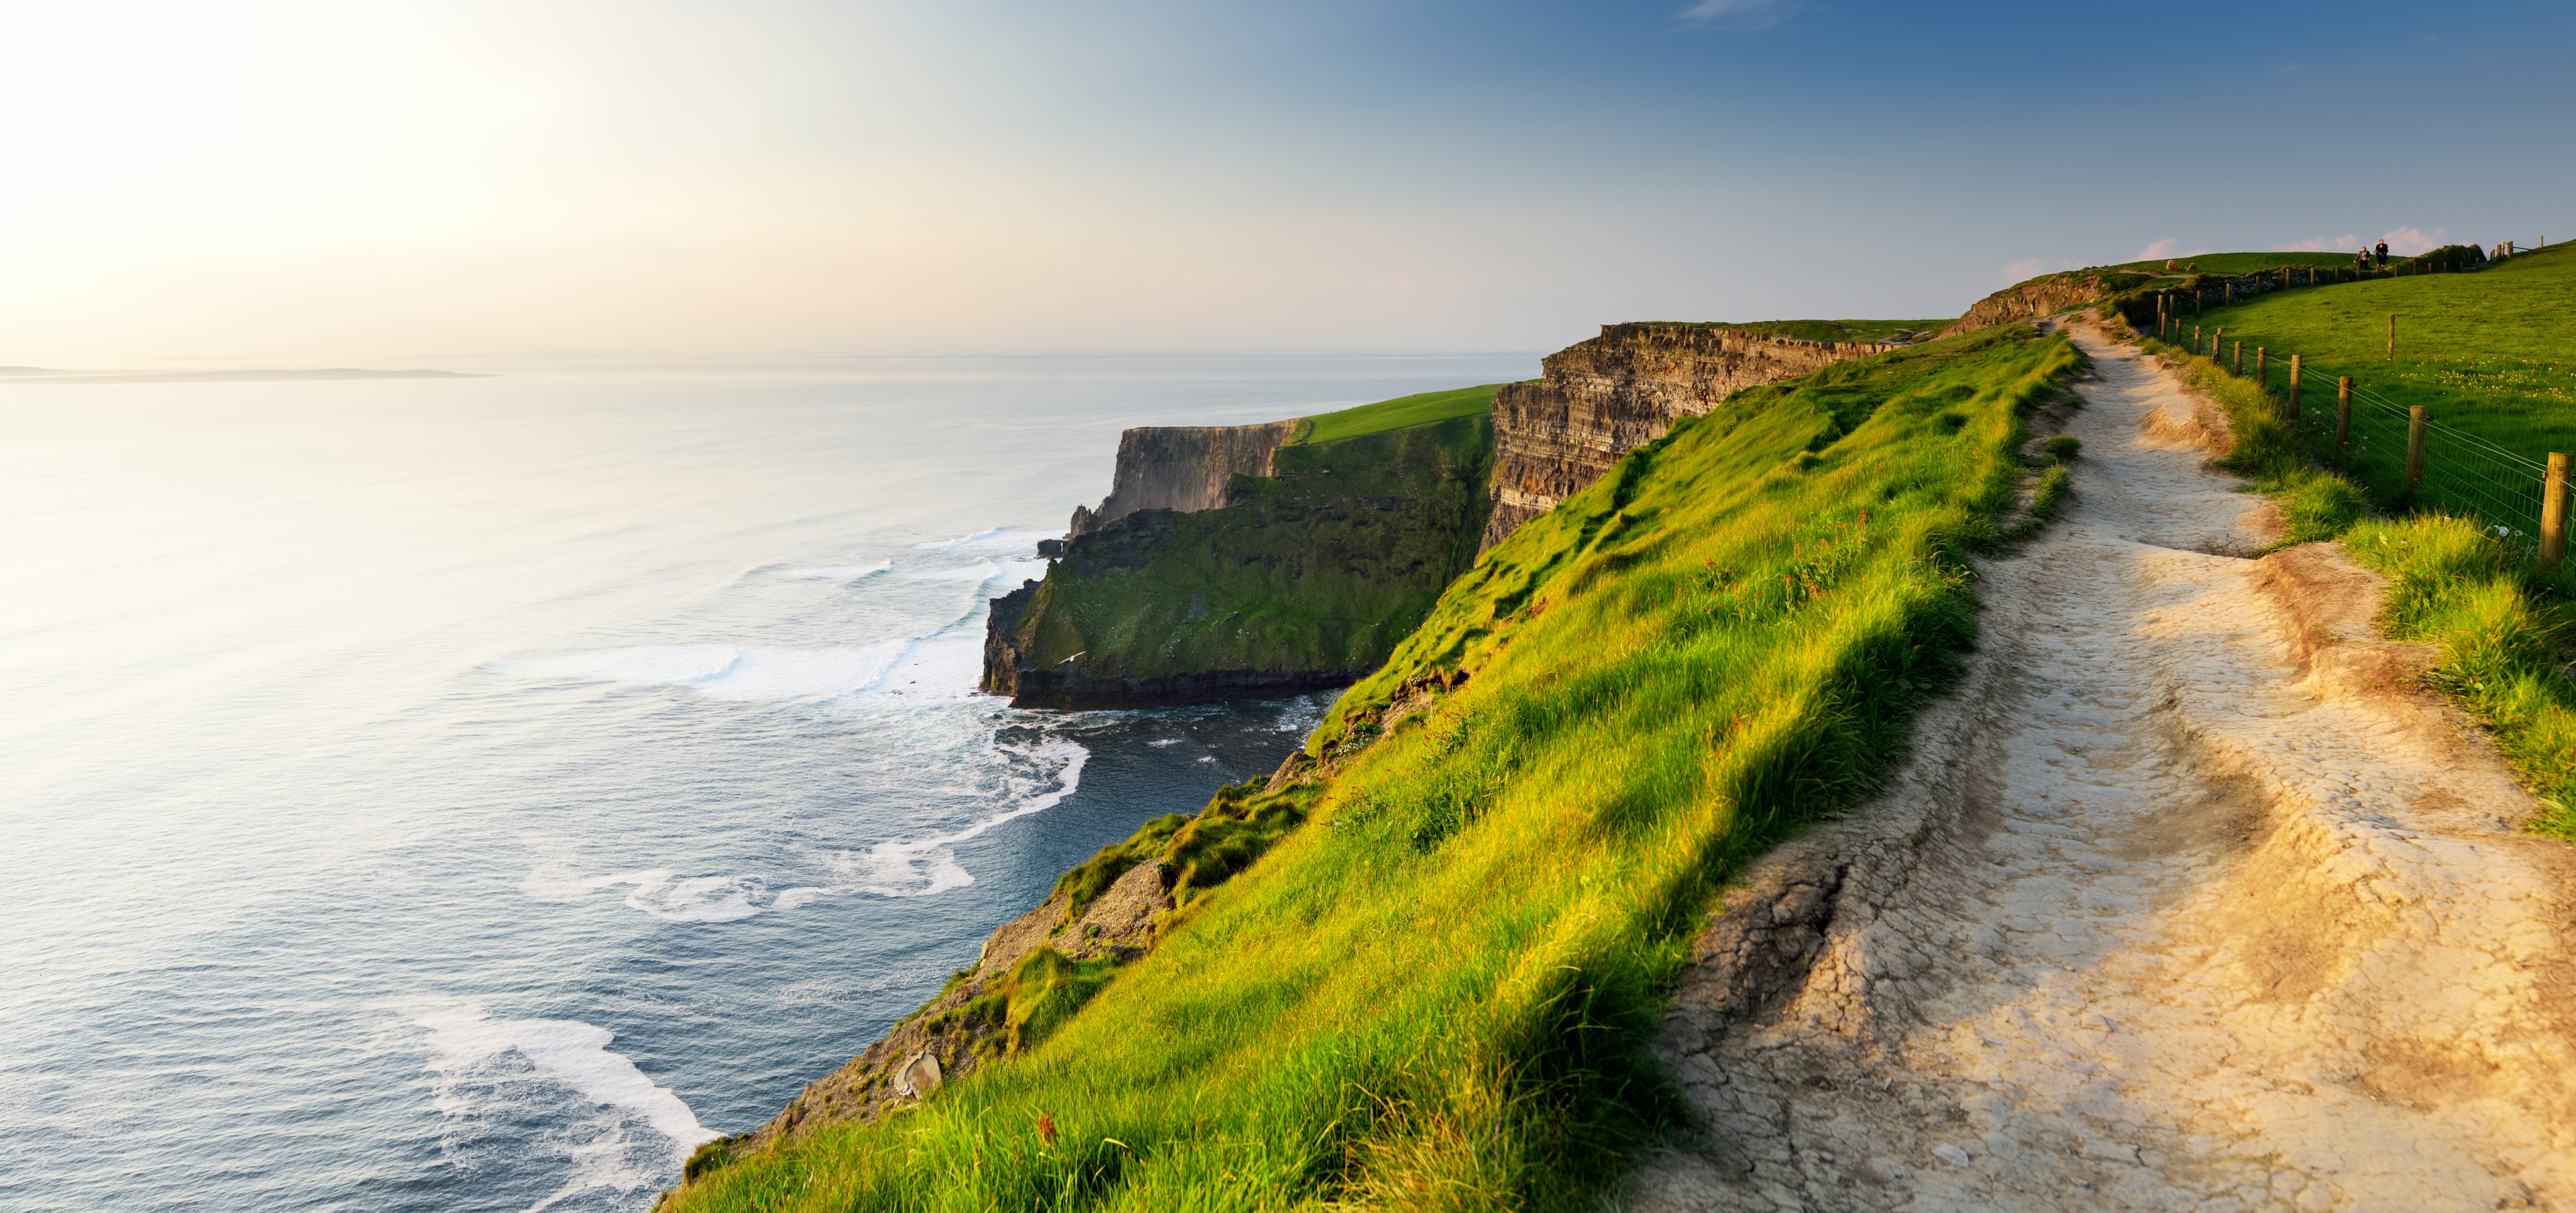 World famous Cliffs of Moher, Wild Atlantic Way in County Clare